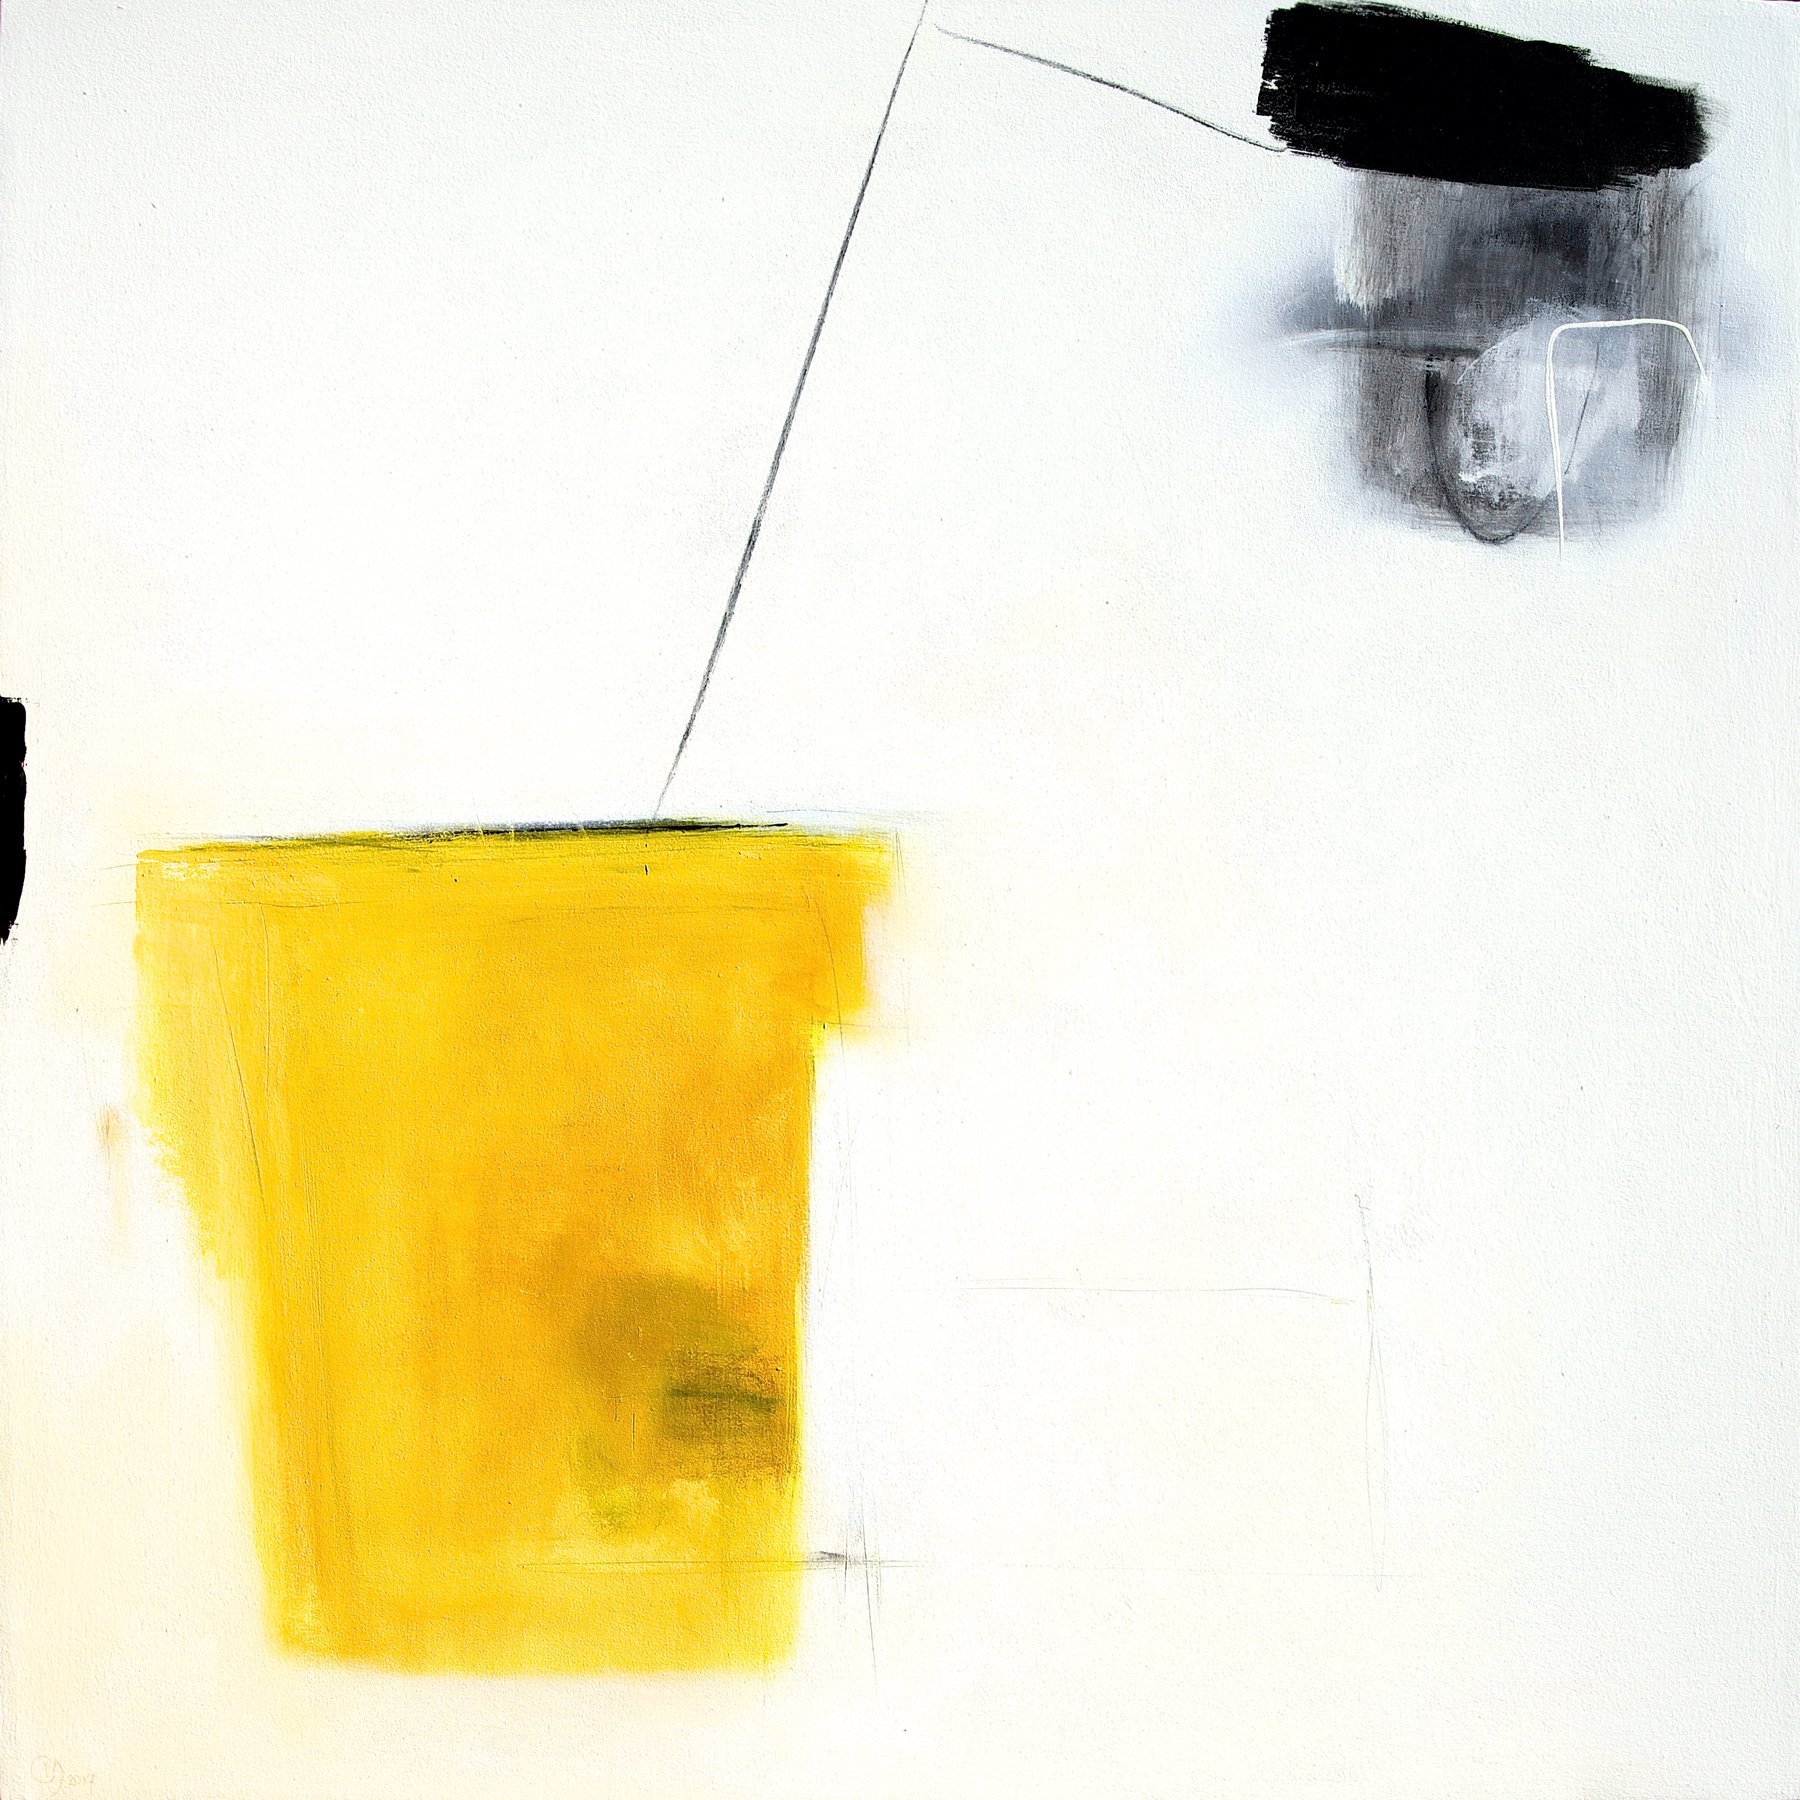 THE LIGHT &amp; THE YELLOW BUTTERFLY - 48x48 inches